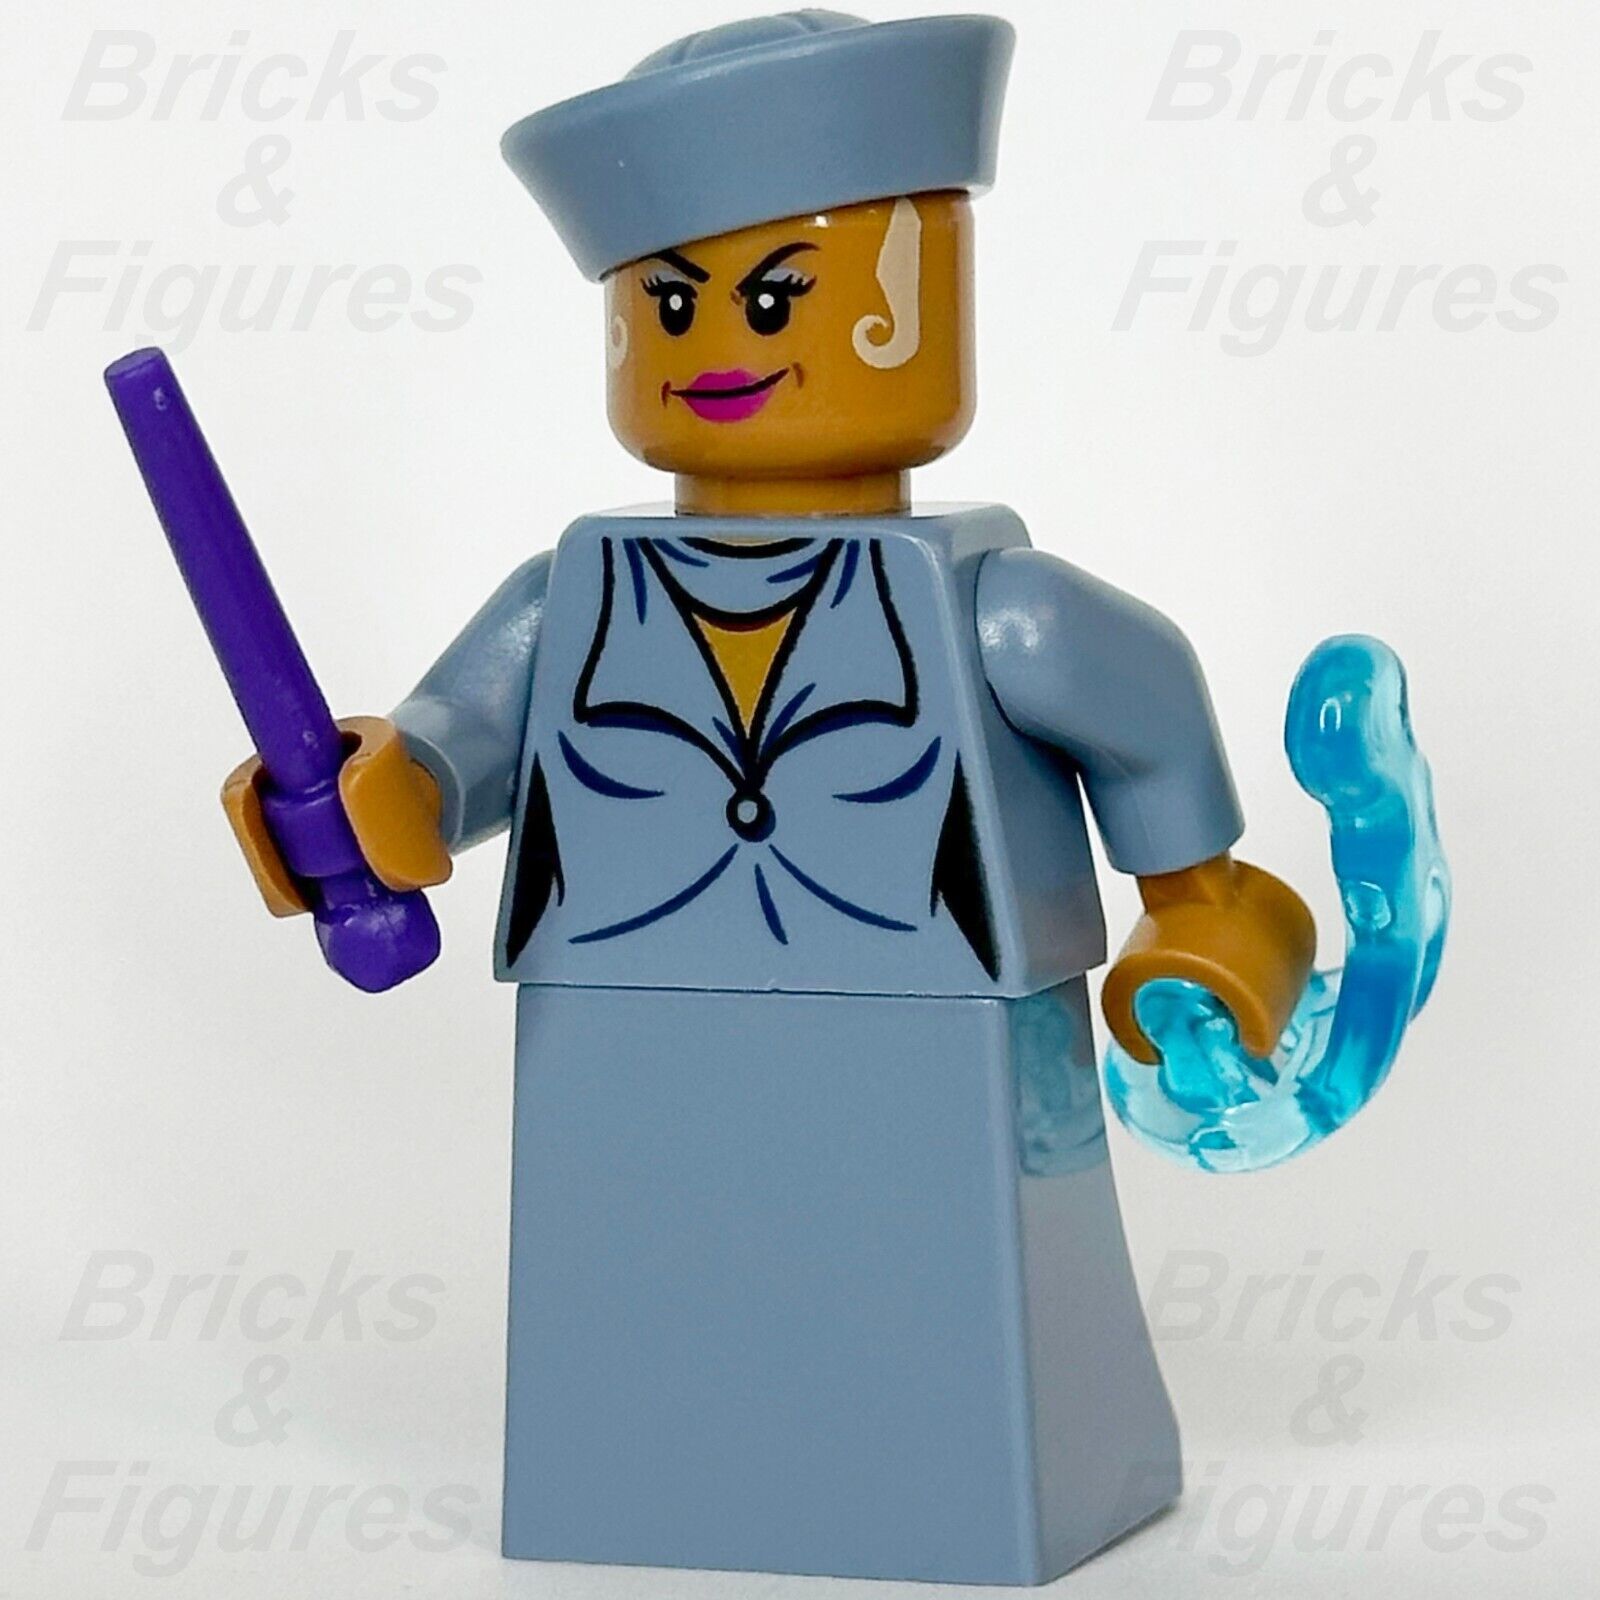 LEGO Harry Potter Seraphina Picquery Minifigure Fantastic Beasts Wizard 75951